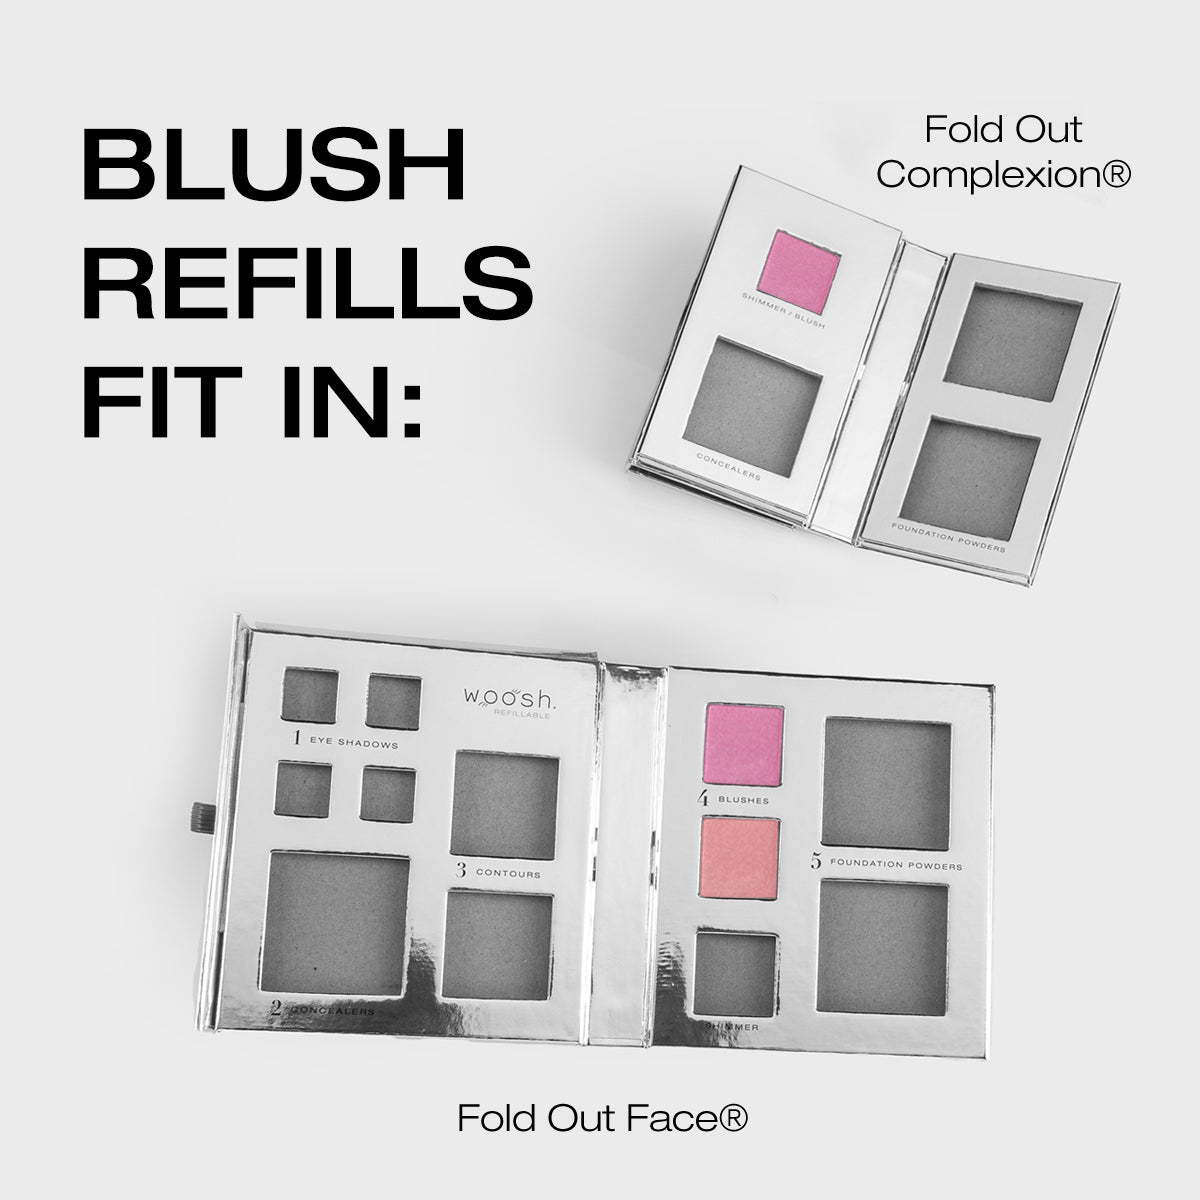 Demo of how the blush refills fit in the fold out complexion and fold out face